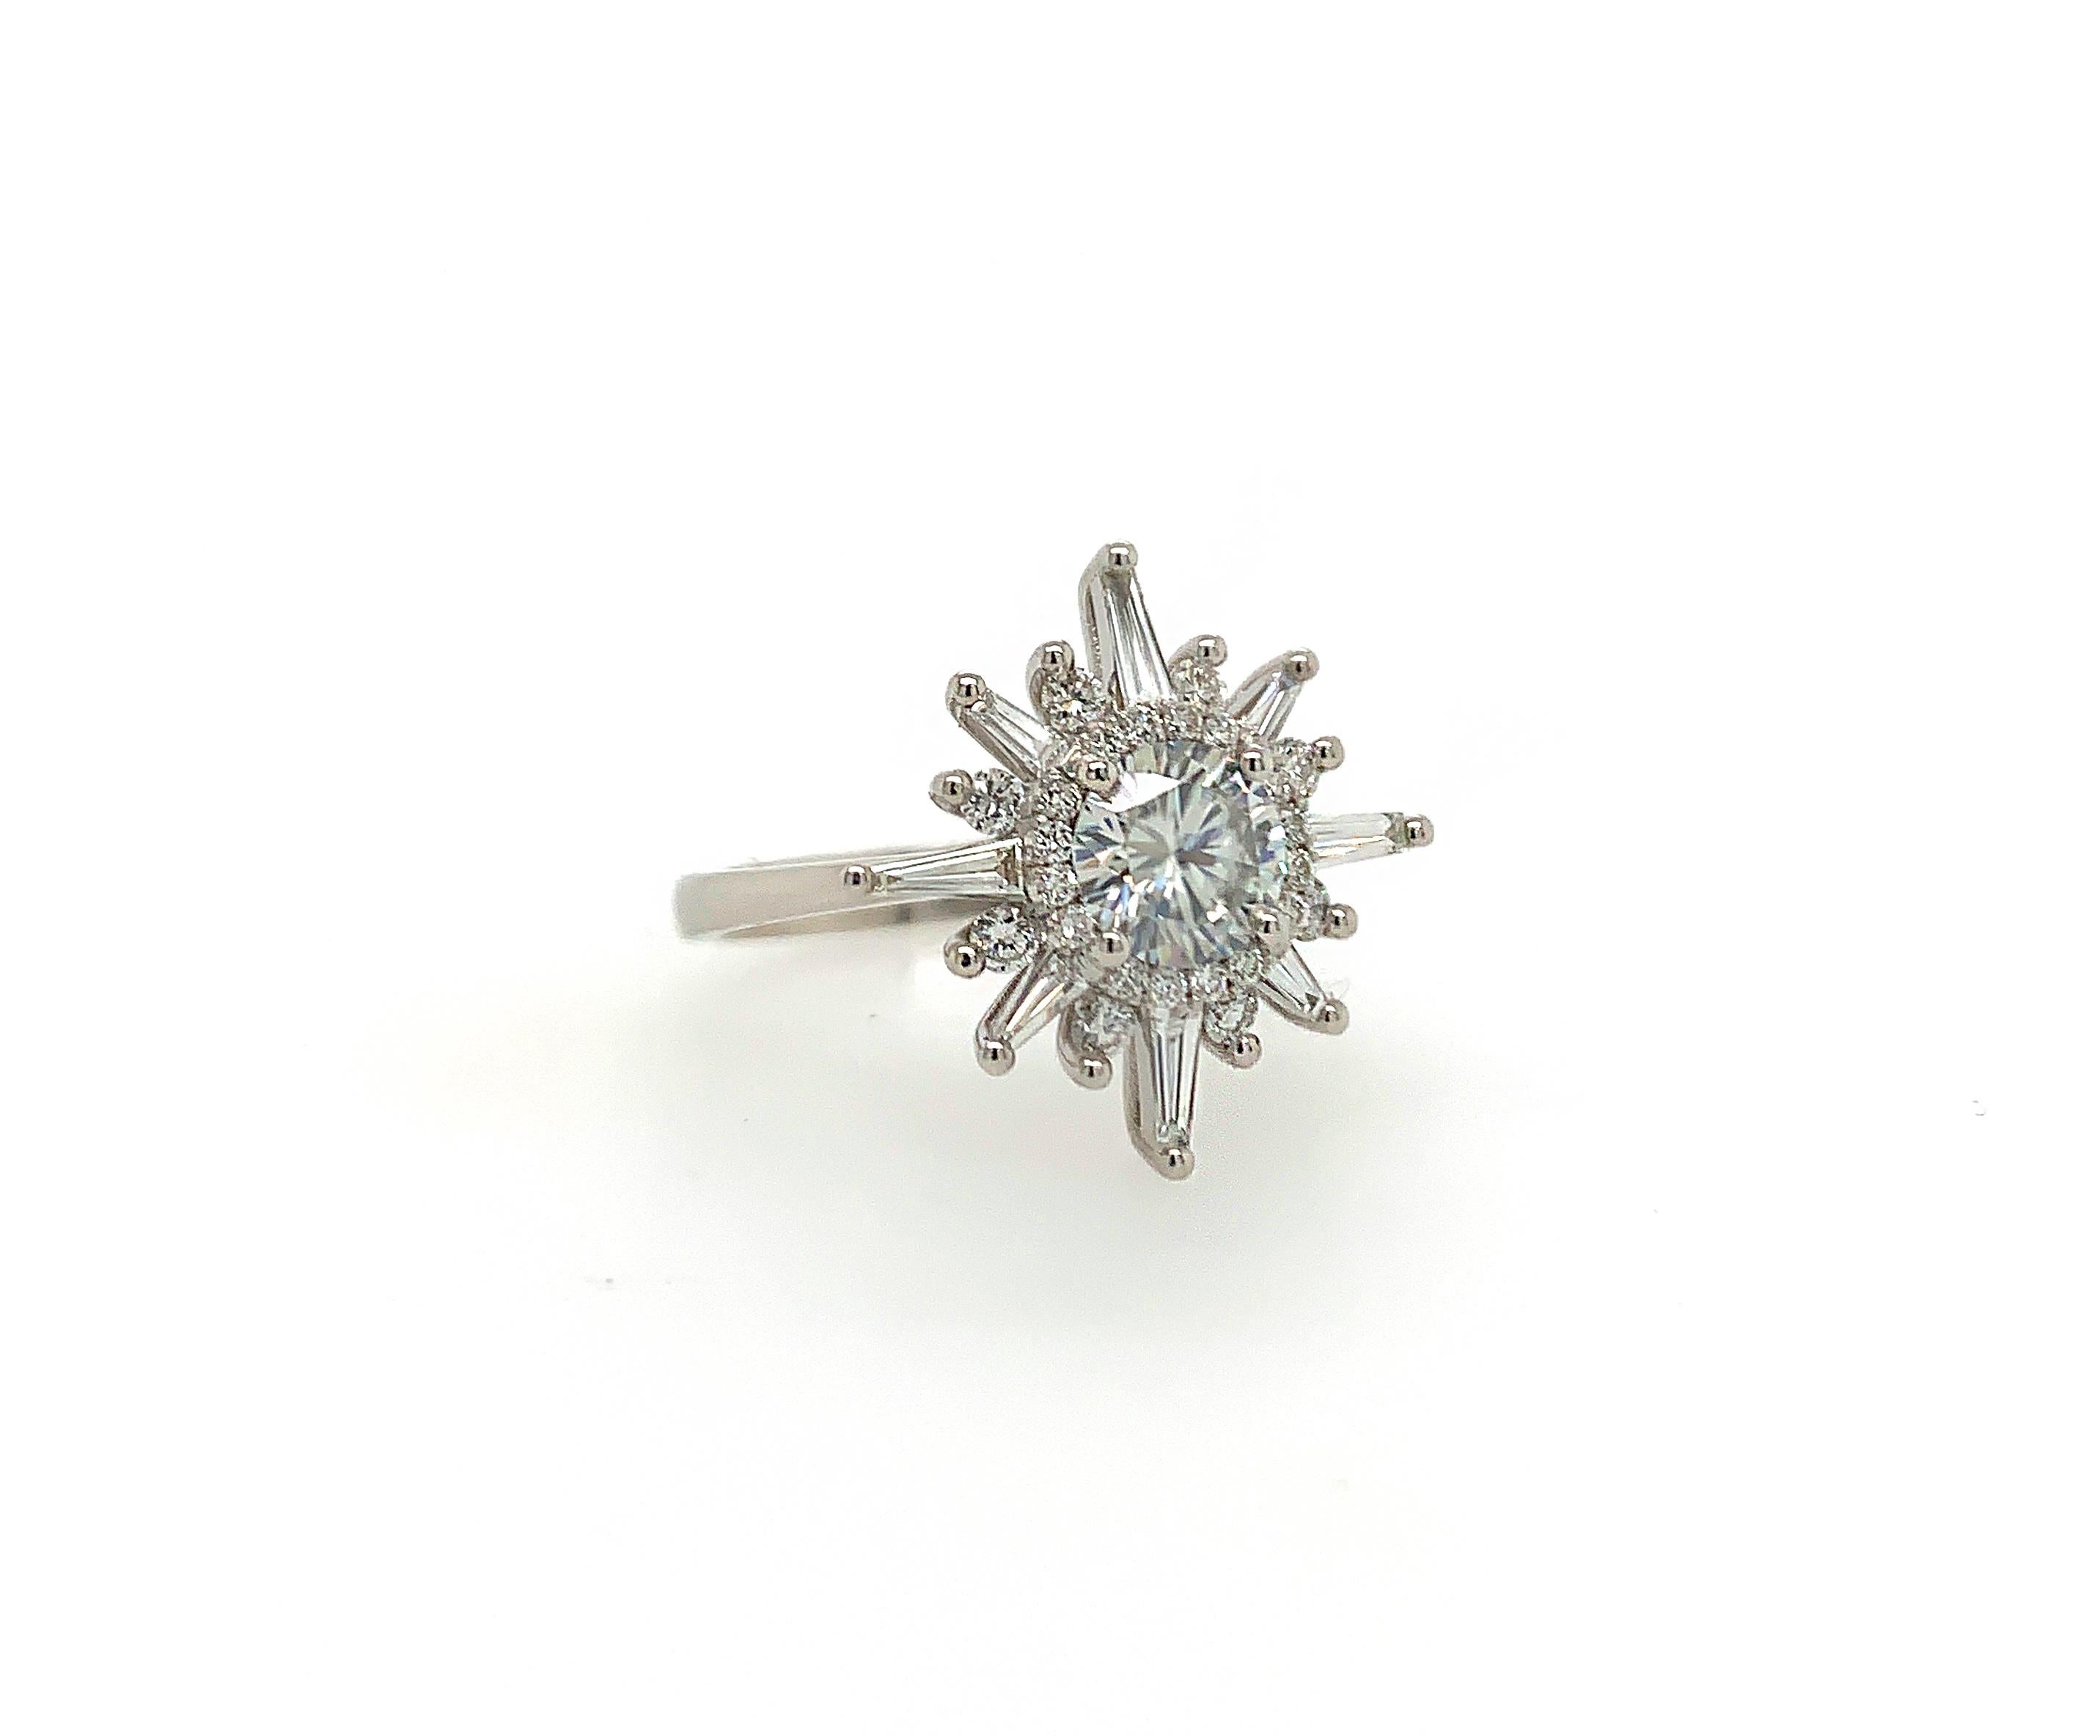 This beautiful ring flaunts a 1.00 carat natural round brilliant white diamond surrounded by a halo, 8 round brilliants and 8 tapered baguettes. The design is inspired by the magical aura of the Northern Star which is the brightest star of its